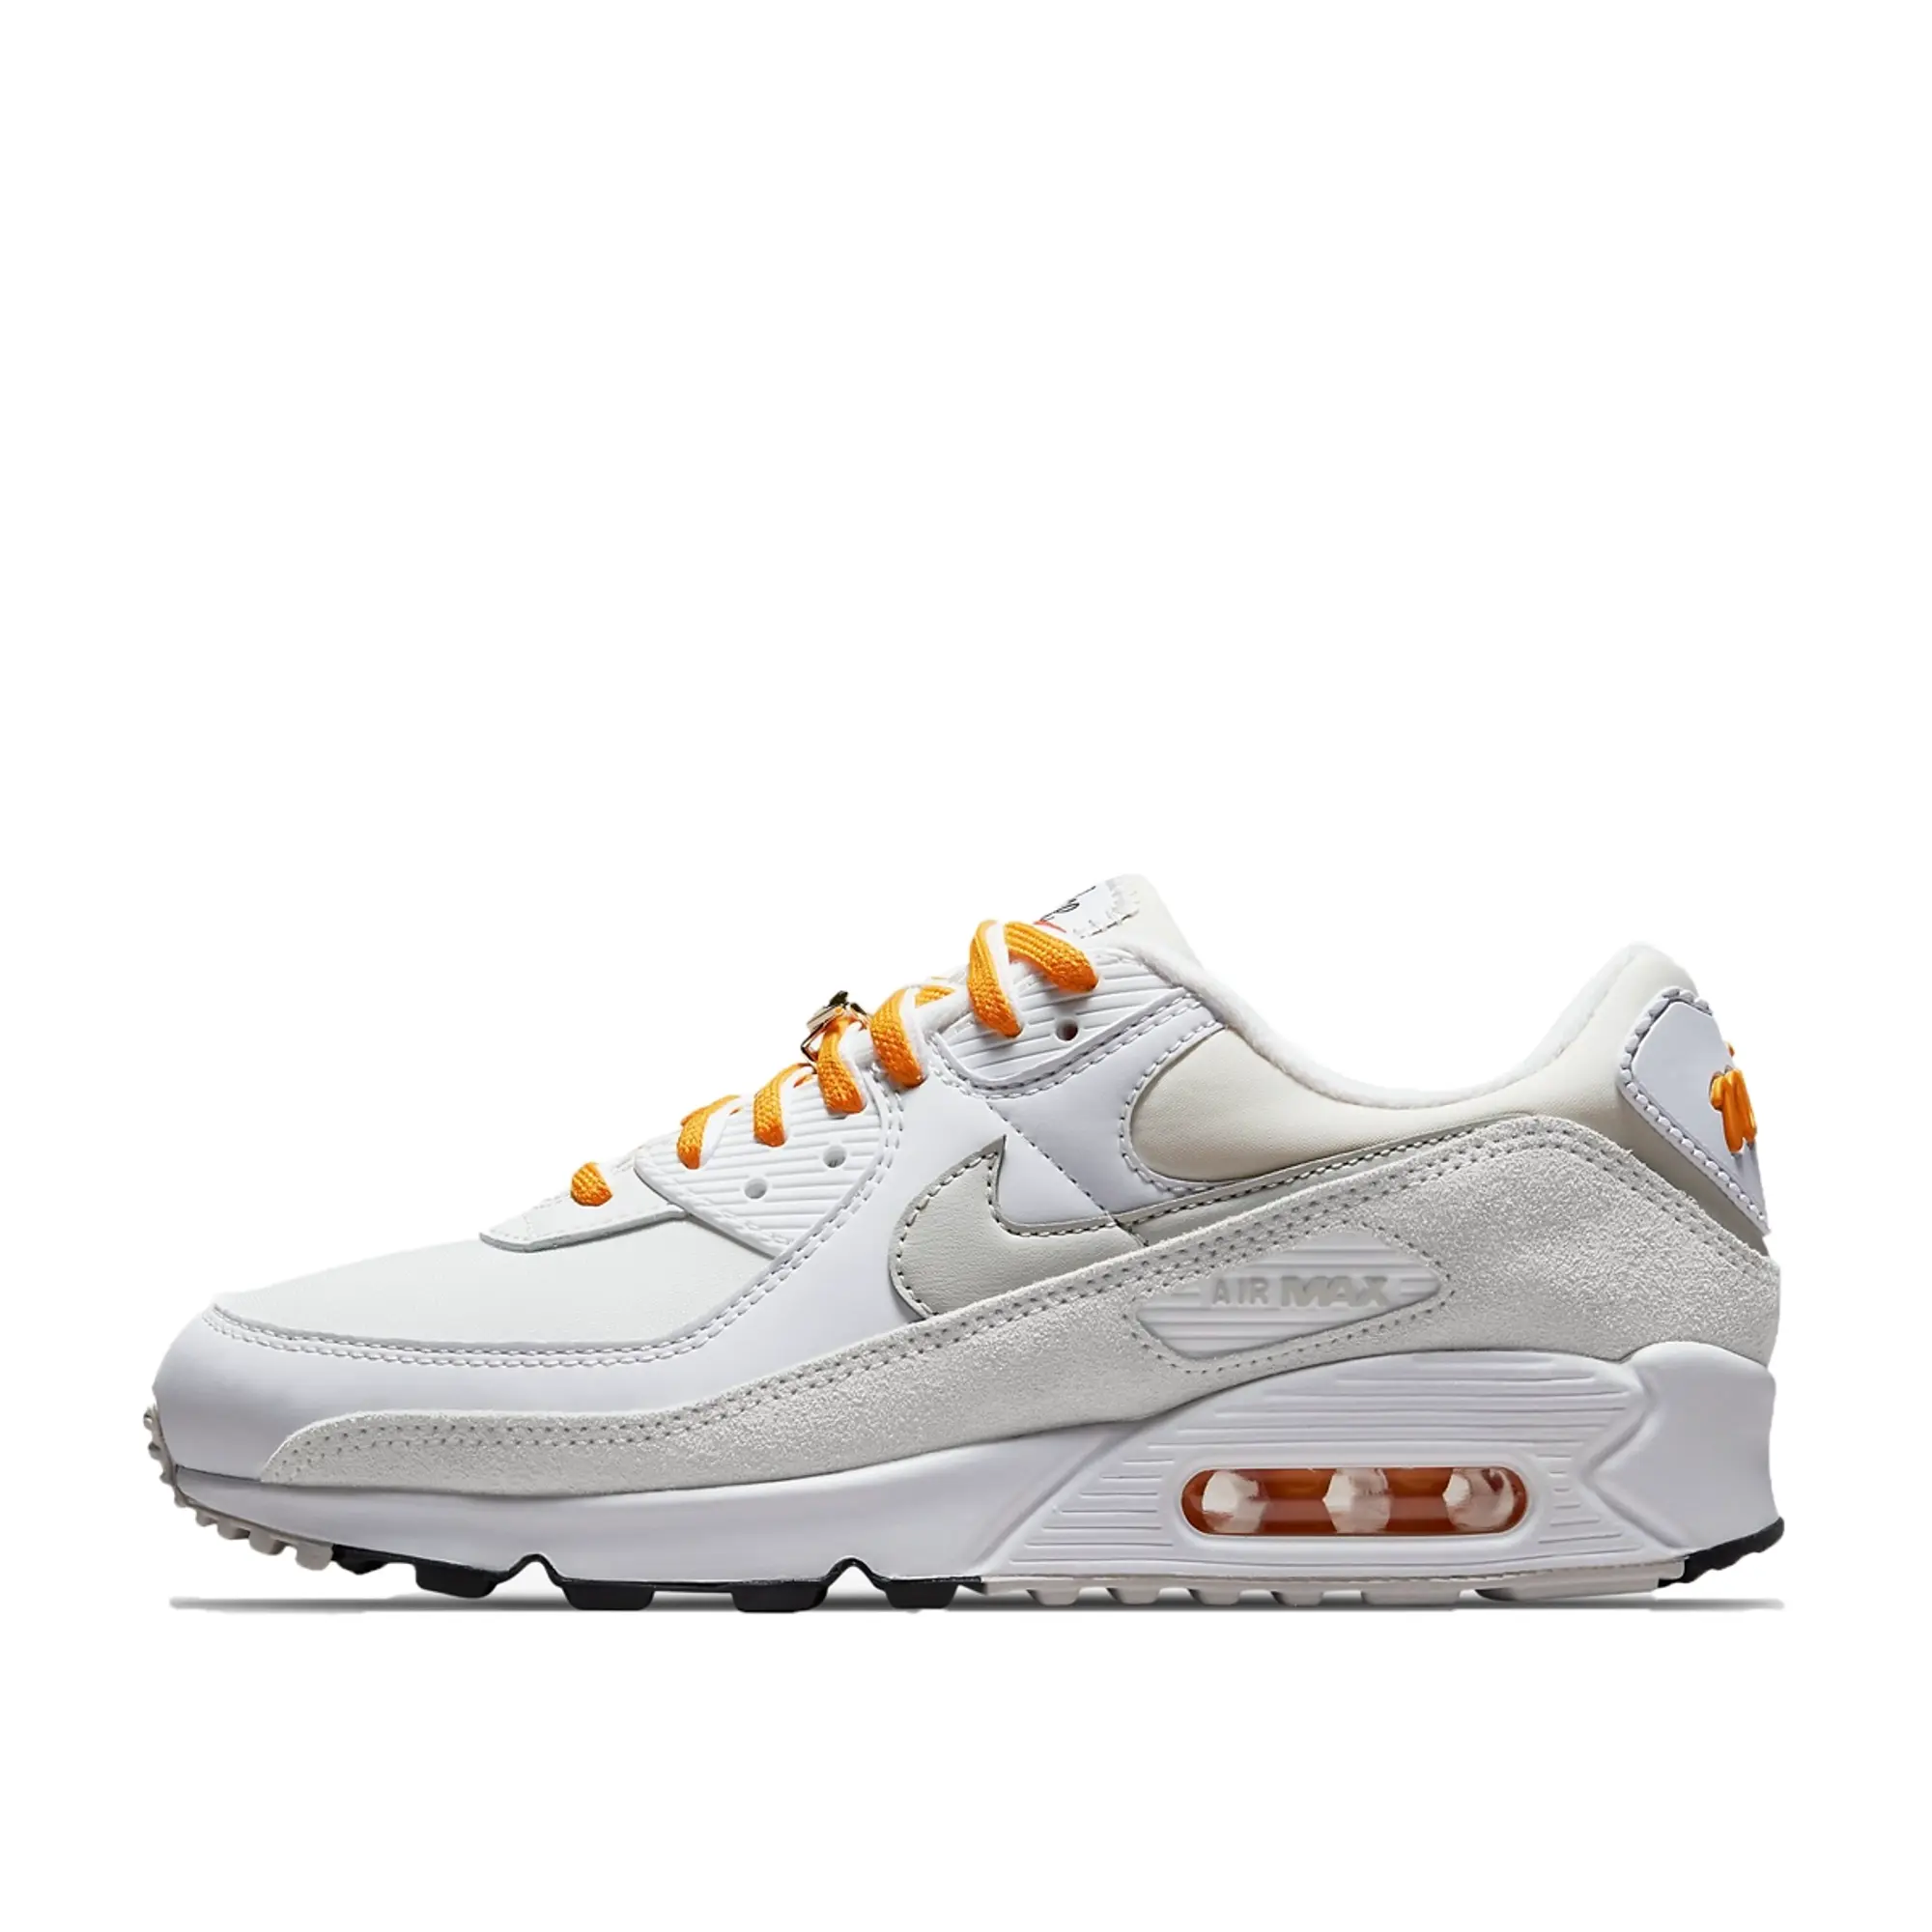 Nike WMNS Air Max 90 SE First Use